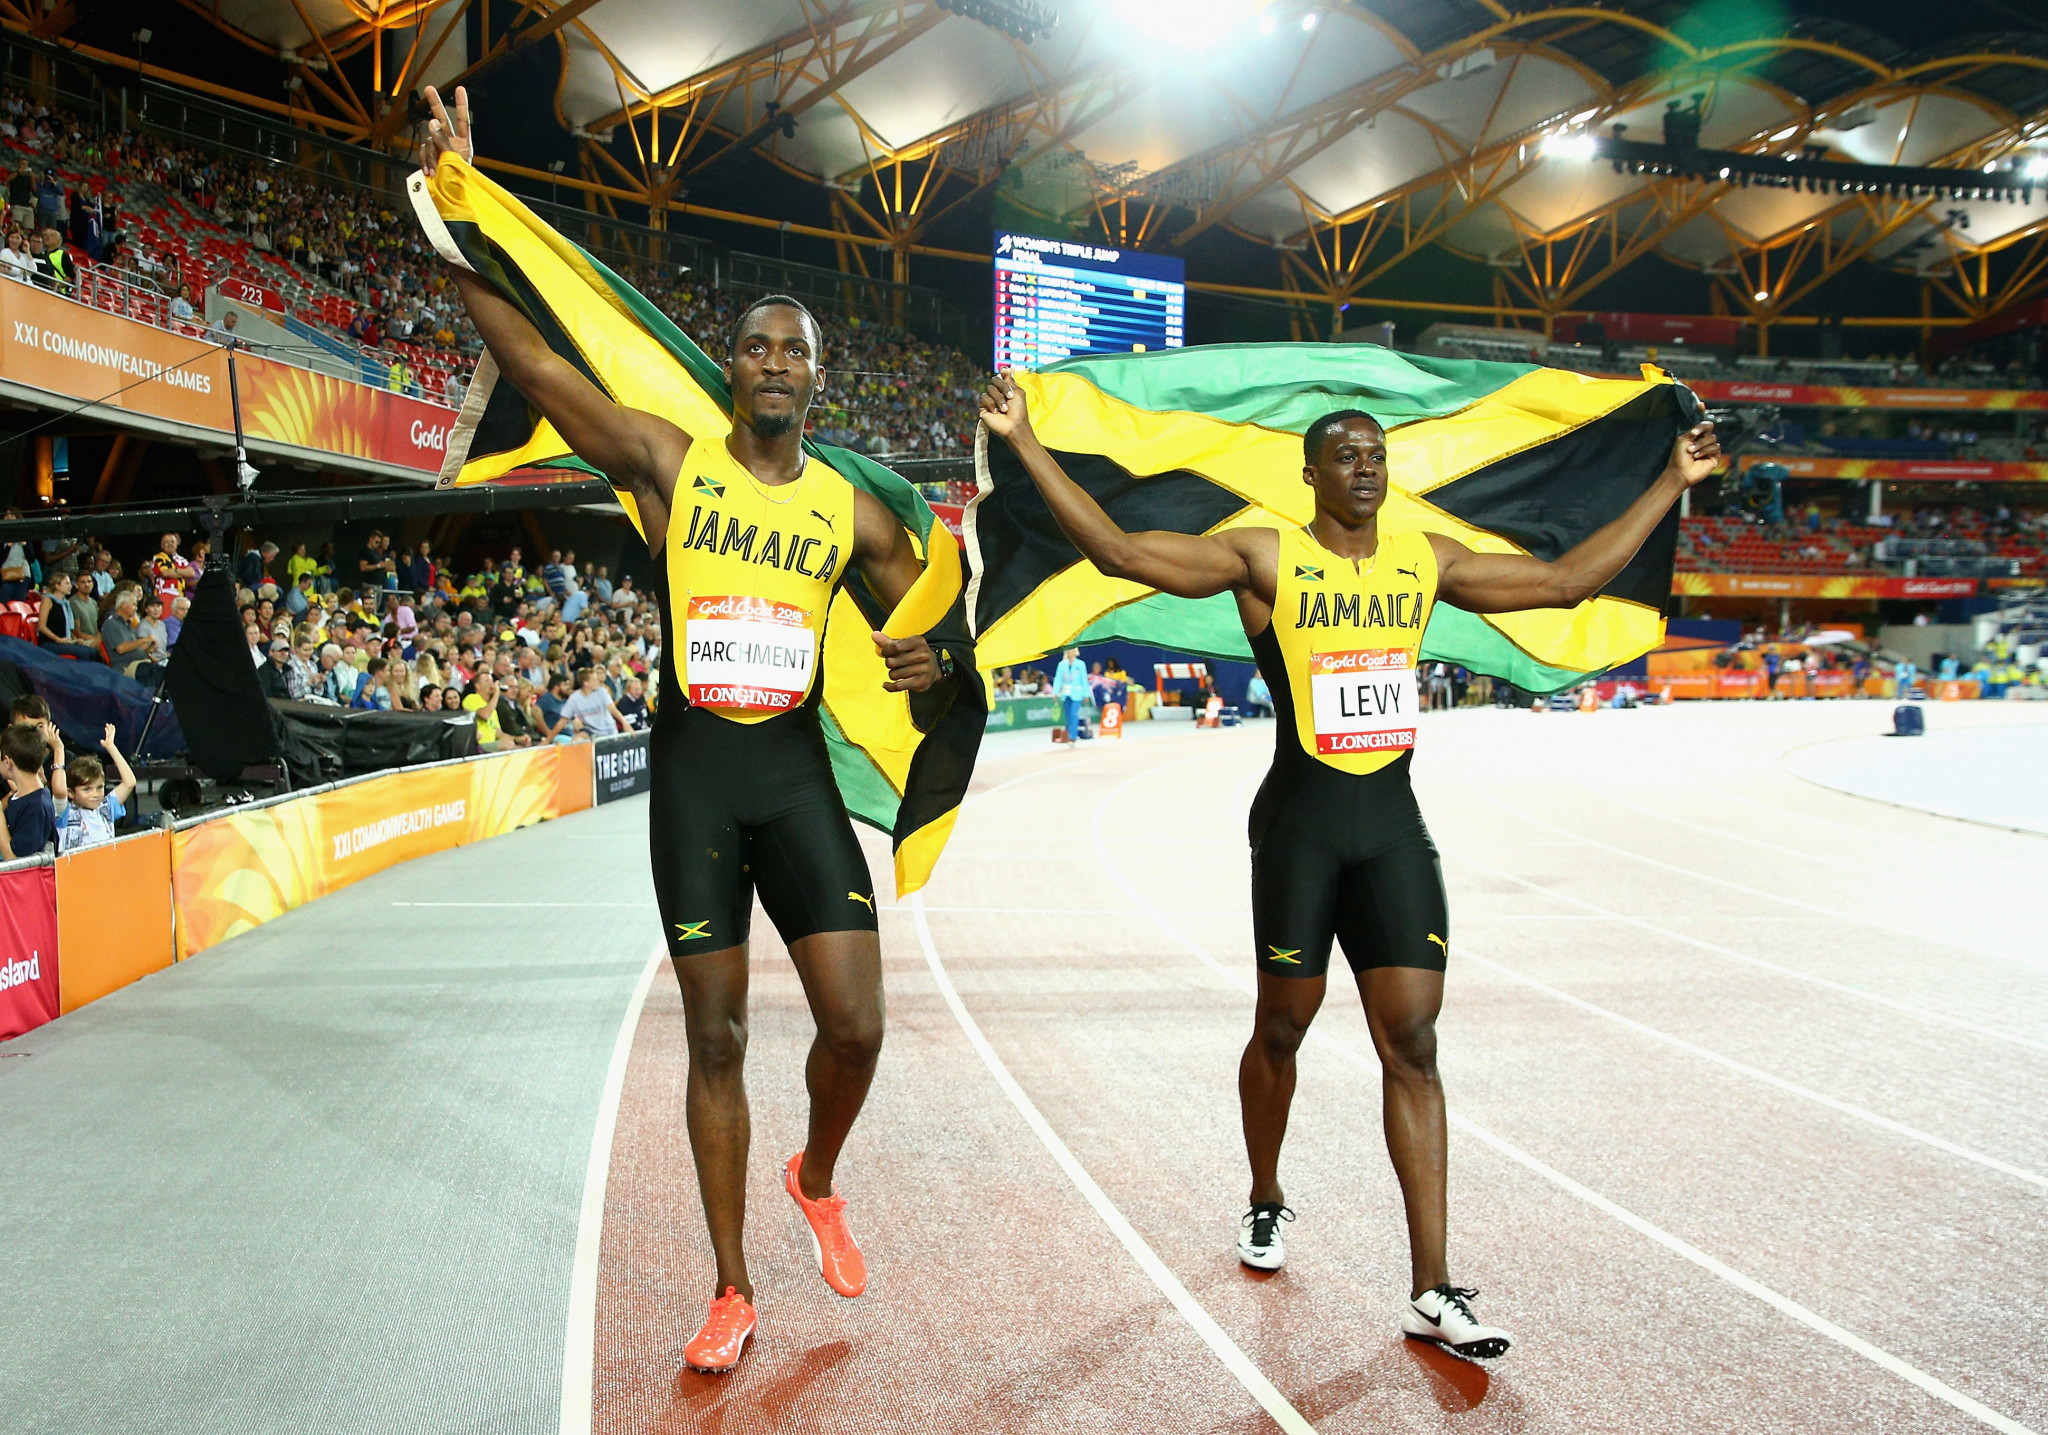 Victory for Ronald Levy, left, in the 110m hurdles  meant it was a good night for Jamaica ©Getty Images